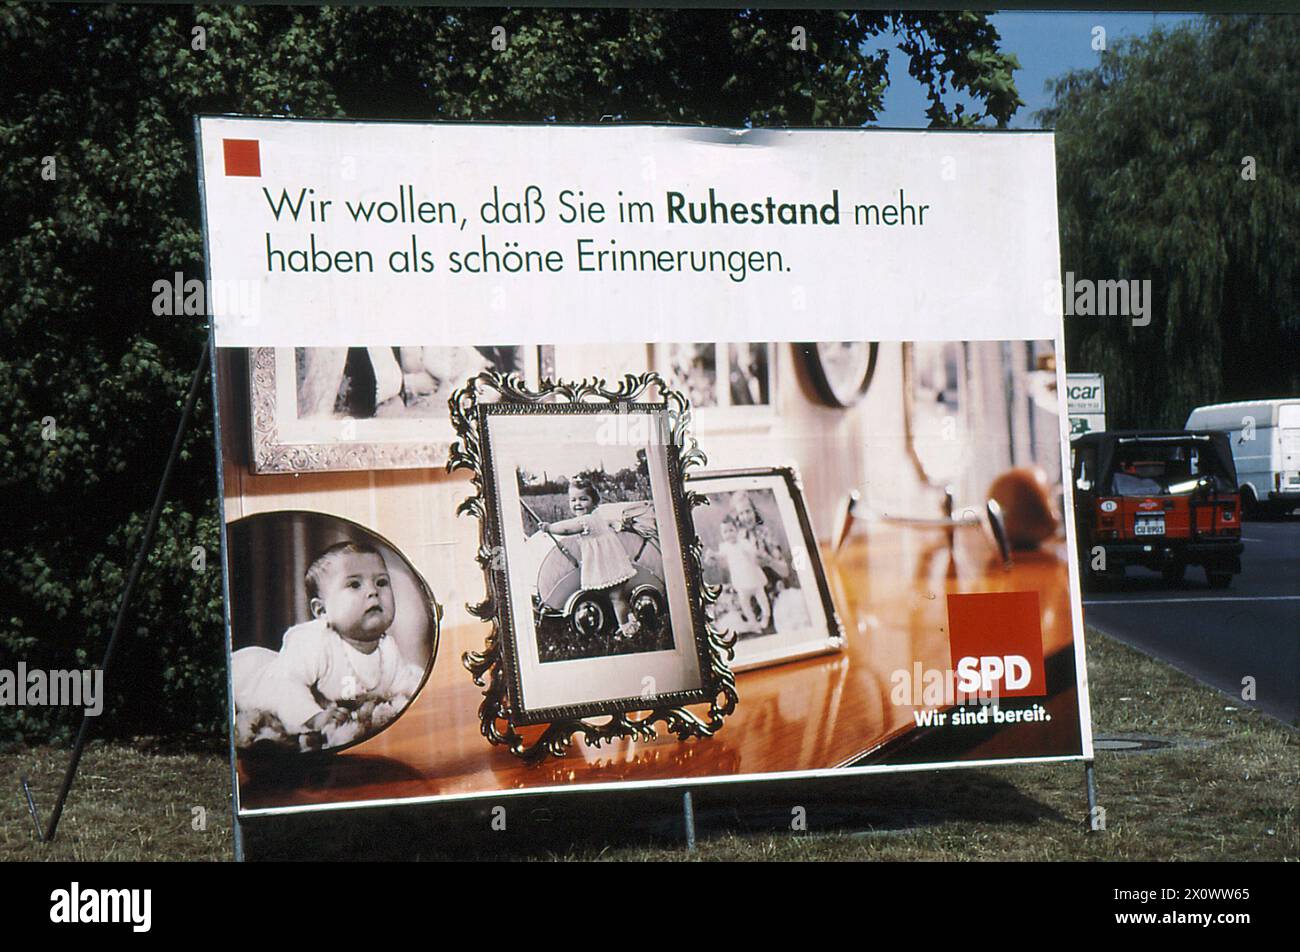 RECORD DATE NOT STATED Berlin/Brandenburg/Germany/Billboards of Helmut Josef Michael Kohl, Geerman canchellor and leader of CDU been vandelized during general eelctions compiagn in Berlain and other billbaards are SPD are fine and people infront billboard in Berlin Brad nenburg Germany Photo.Francis Joseph Dean/Dean Pictures Stock Photo